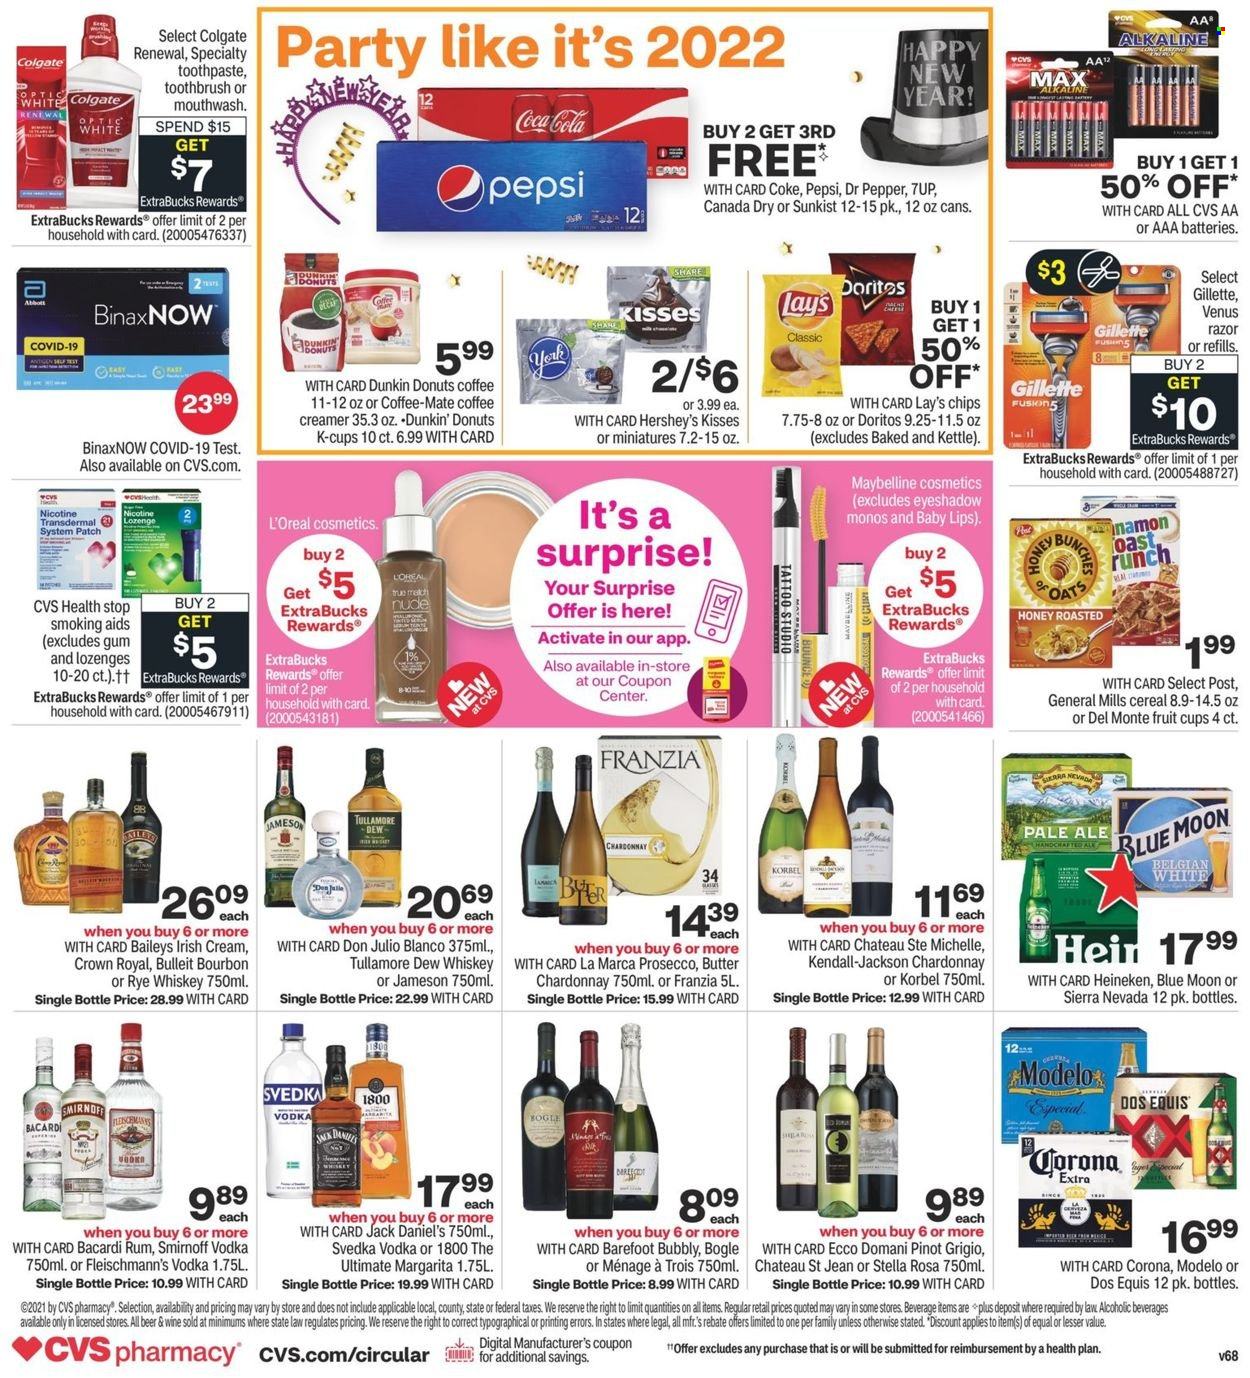 thumbnail - CVS Pharmacy Flyer - 12/26/2021 - 01/01/2022 - Sales products - Jack Daniel's, Coffee-Mate, Hershey's, Doritos, chips, Lay’s, cereals, Canada Dry, Coca-Cola, Pepsi, Dr. Pepper, 7UP, coffee capsules, K-Cups, Dunkin' Donuts, white wine, prosecco, Chardonnay, wine, Pinot Grigio, Bacardi, bourbon, rum, Smirnoff, vodka, whiskey, irish cream, Jameson, Baileys, whisky, Colgate, toothbrush, toothpaste, mouthwash, L’Oréal, Maybelline, Gillette, razor, Venus, AAA batteries, beer, Corona Extra, Heineken, Modelo, eyeshadow, Dos Equis, Blue Moon. Page 2.